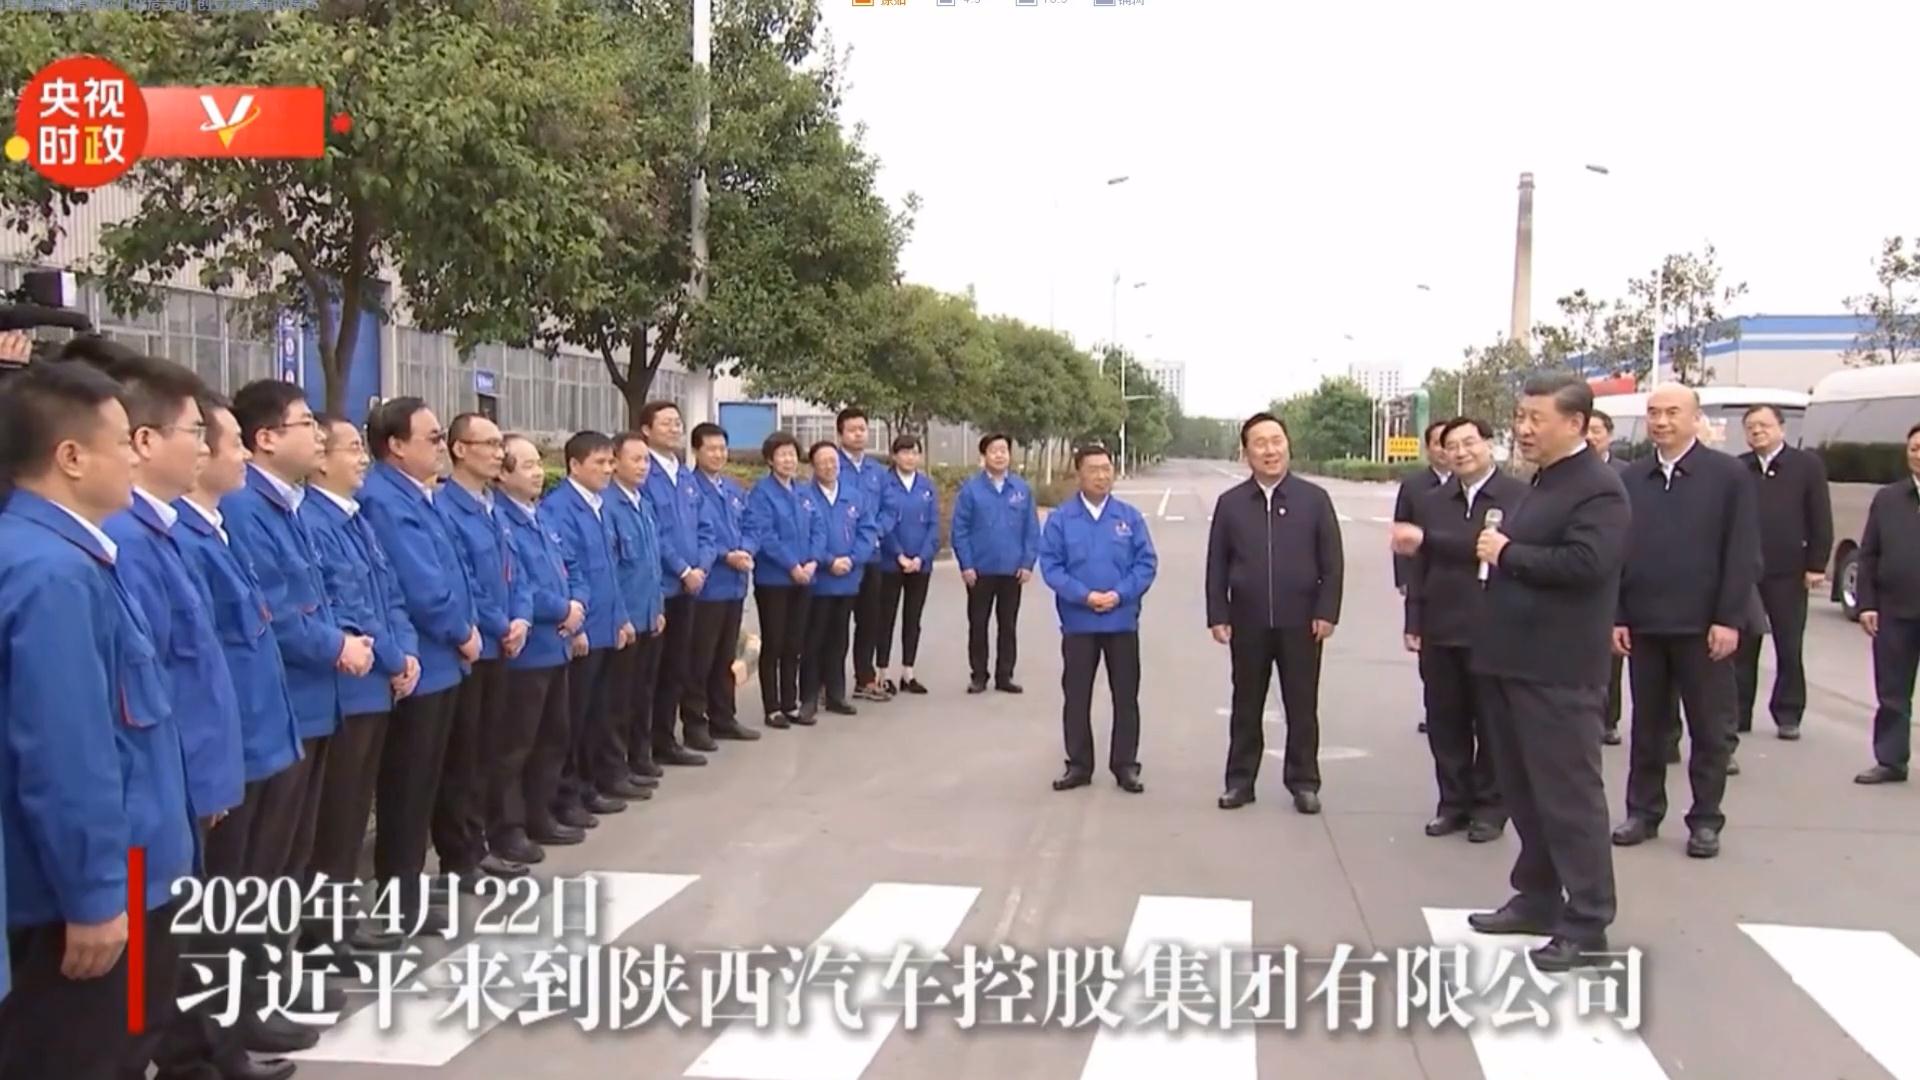 Xi visited SHACMAN